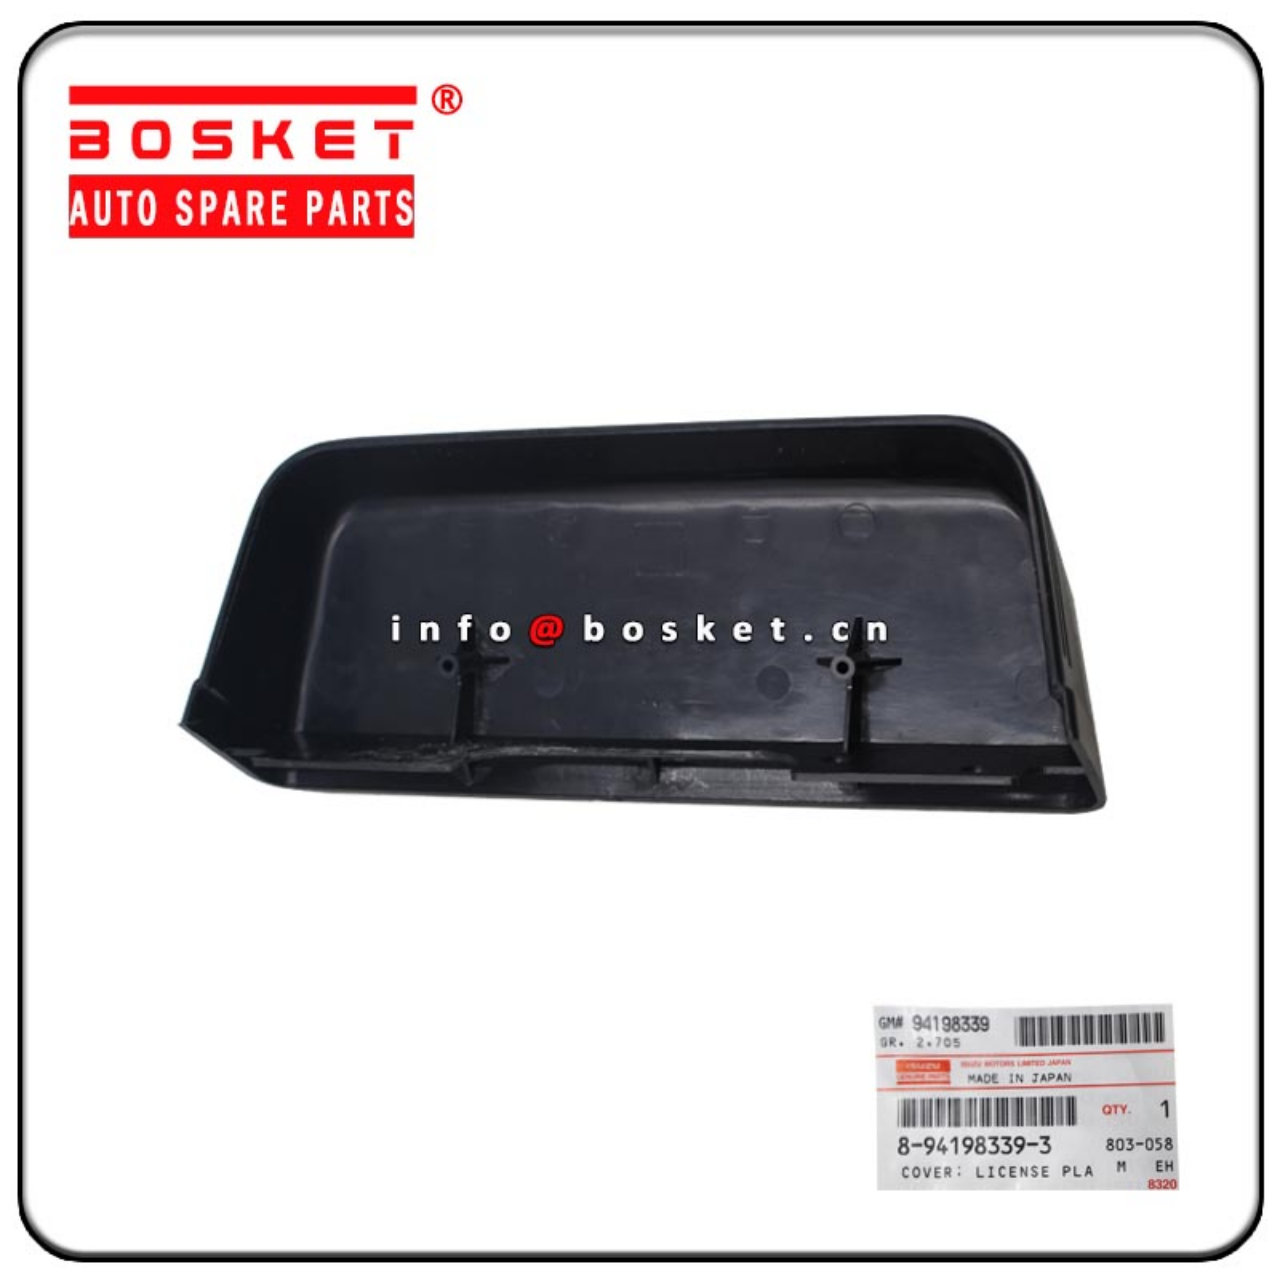 8941983393 8-94198339-3 License Plate Lamp Cover Suitable for ISUZU 